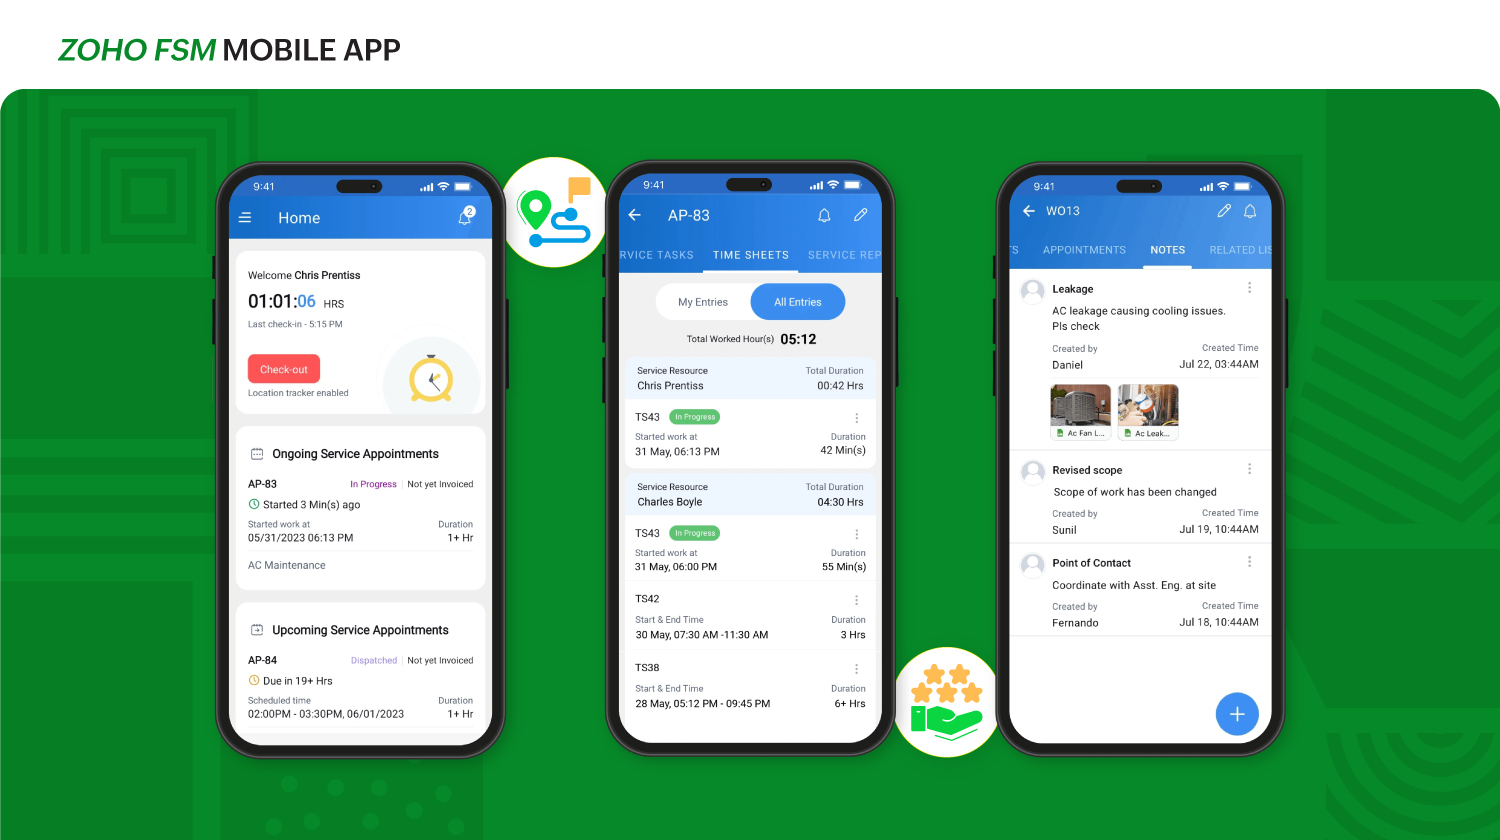 The Zoho FSM mobile app empowers field agents with customer and job details. It allows them to navigate to the job site and lets them log trips and timesheets and add notes and photos.